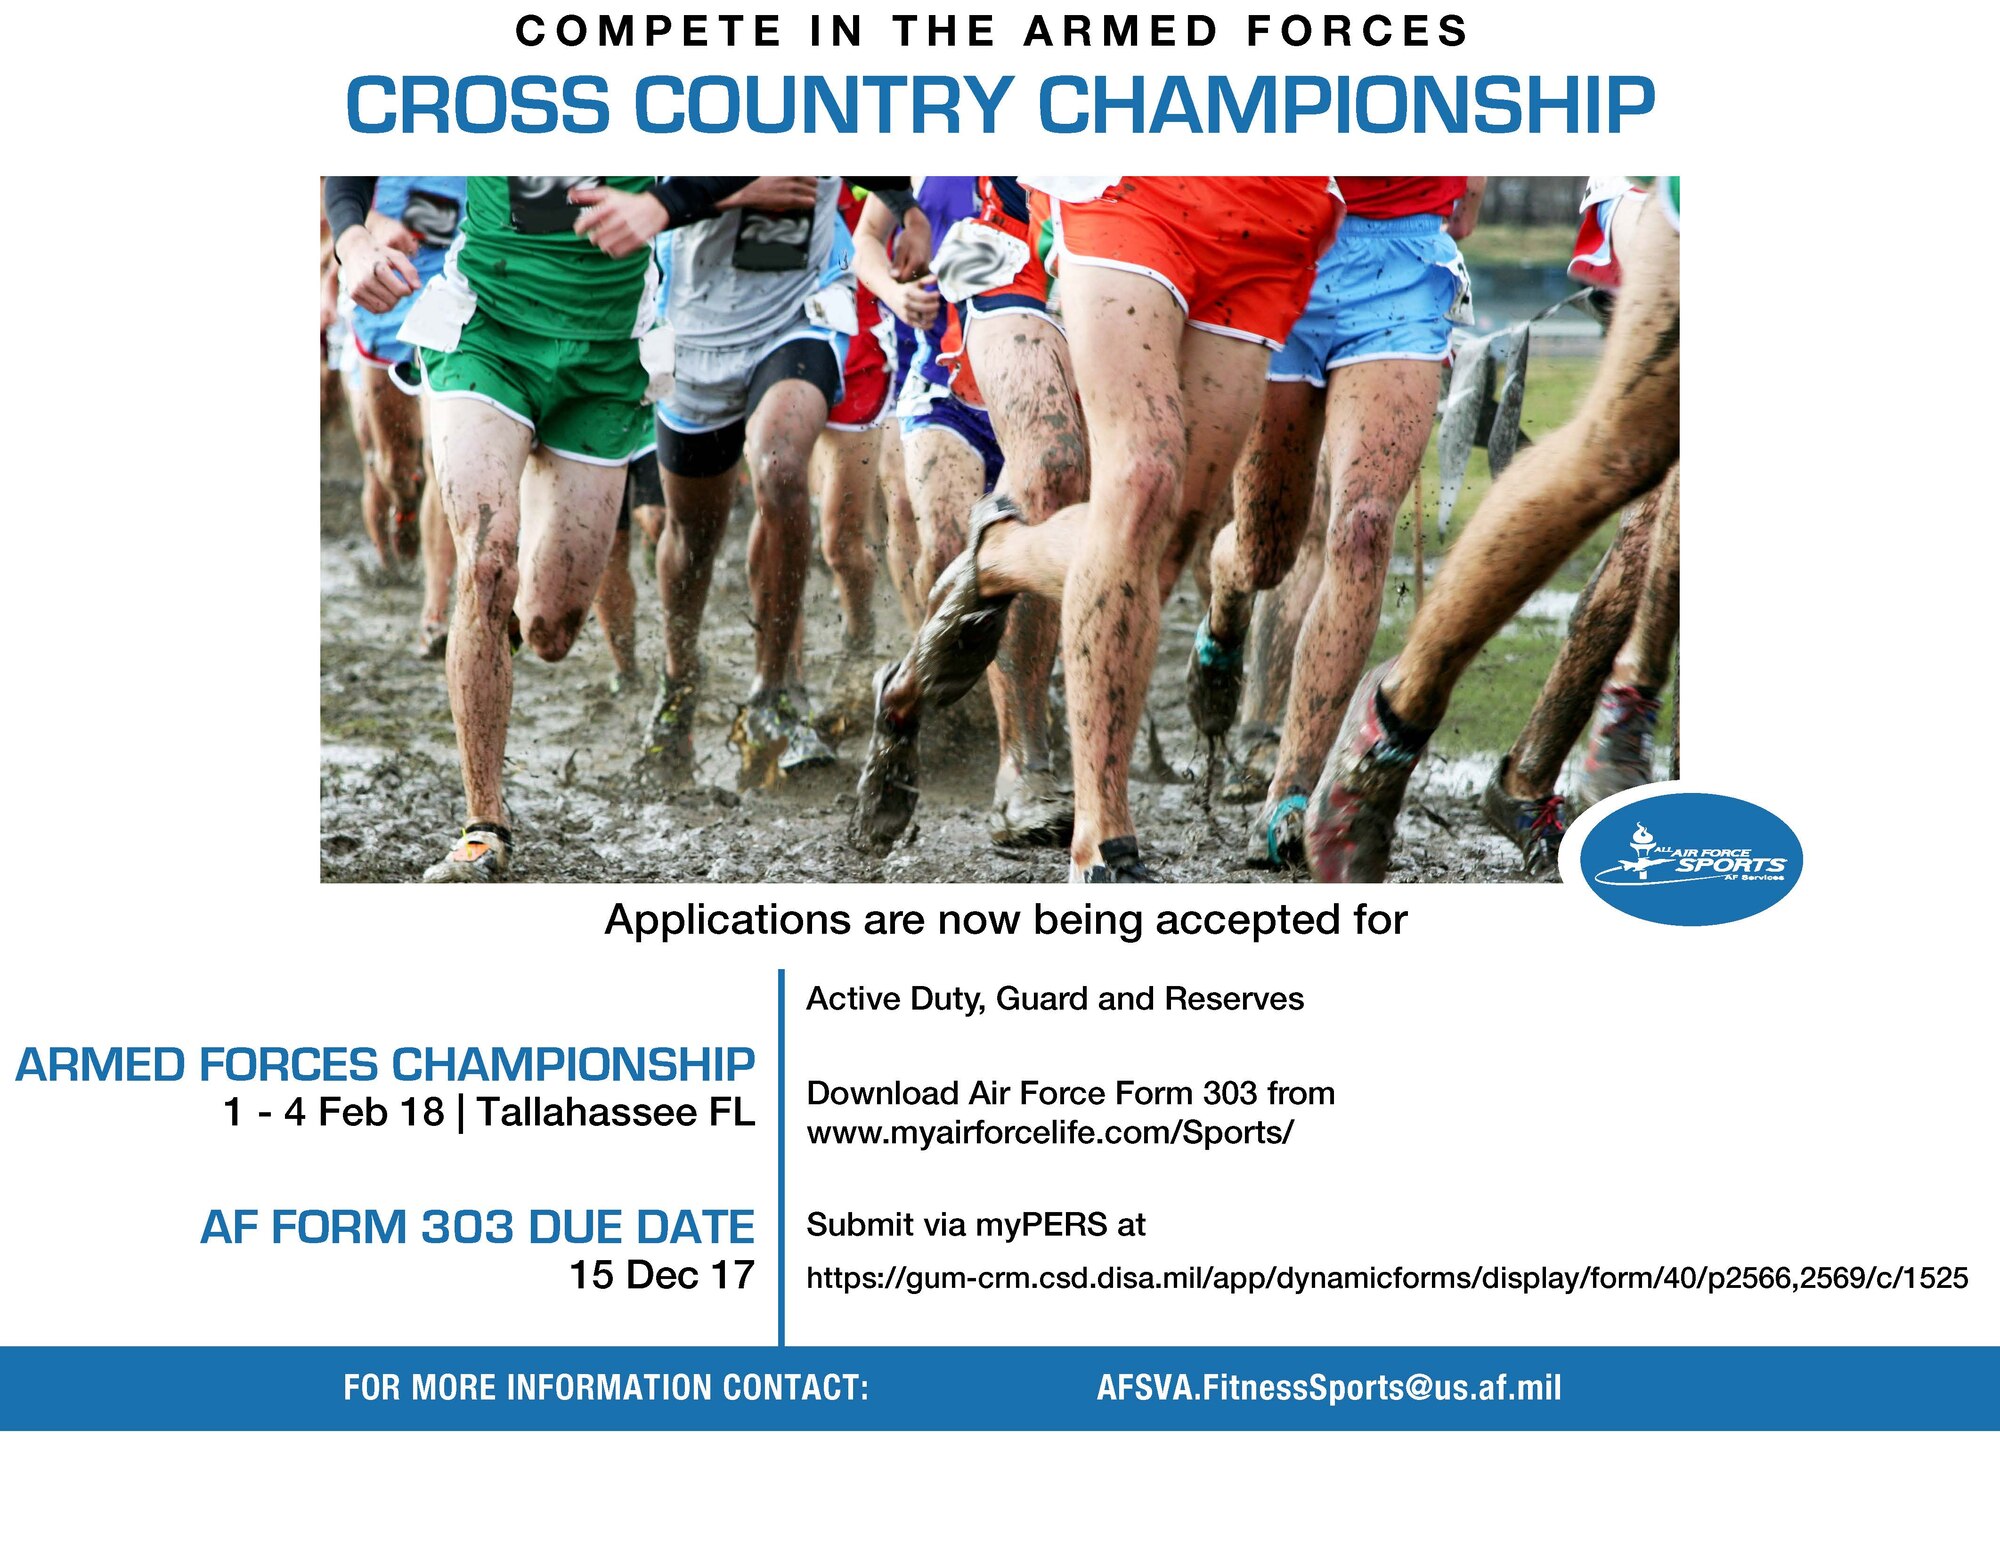 Air Force Sports is accepting applications for Airmen to compete in the 2018 Armed Forces Cross Country Championships to be held in Tallahassee, Florida, Feb. 1 - 4, 2018.